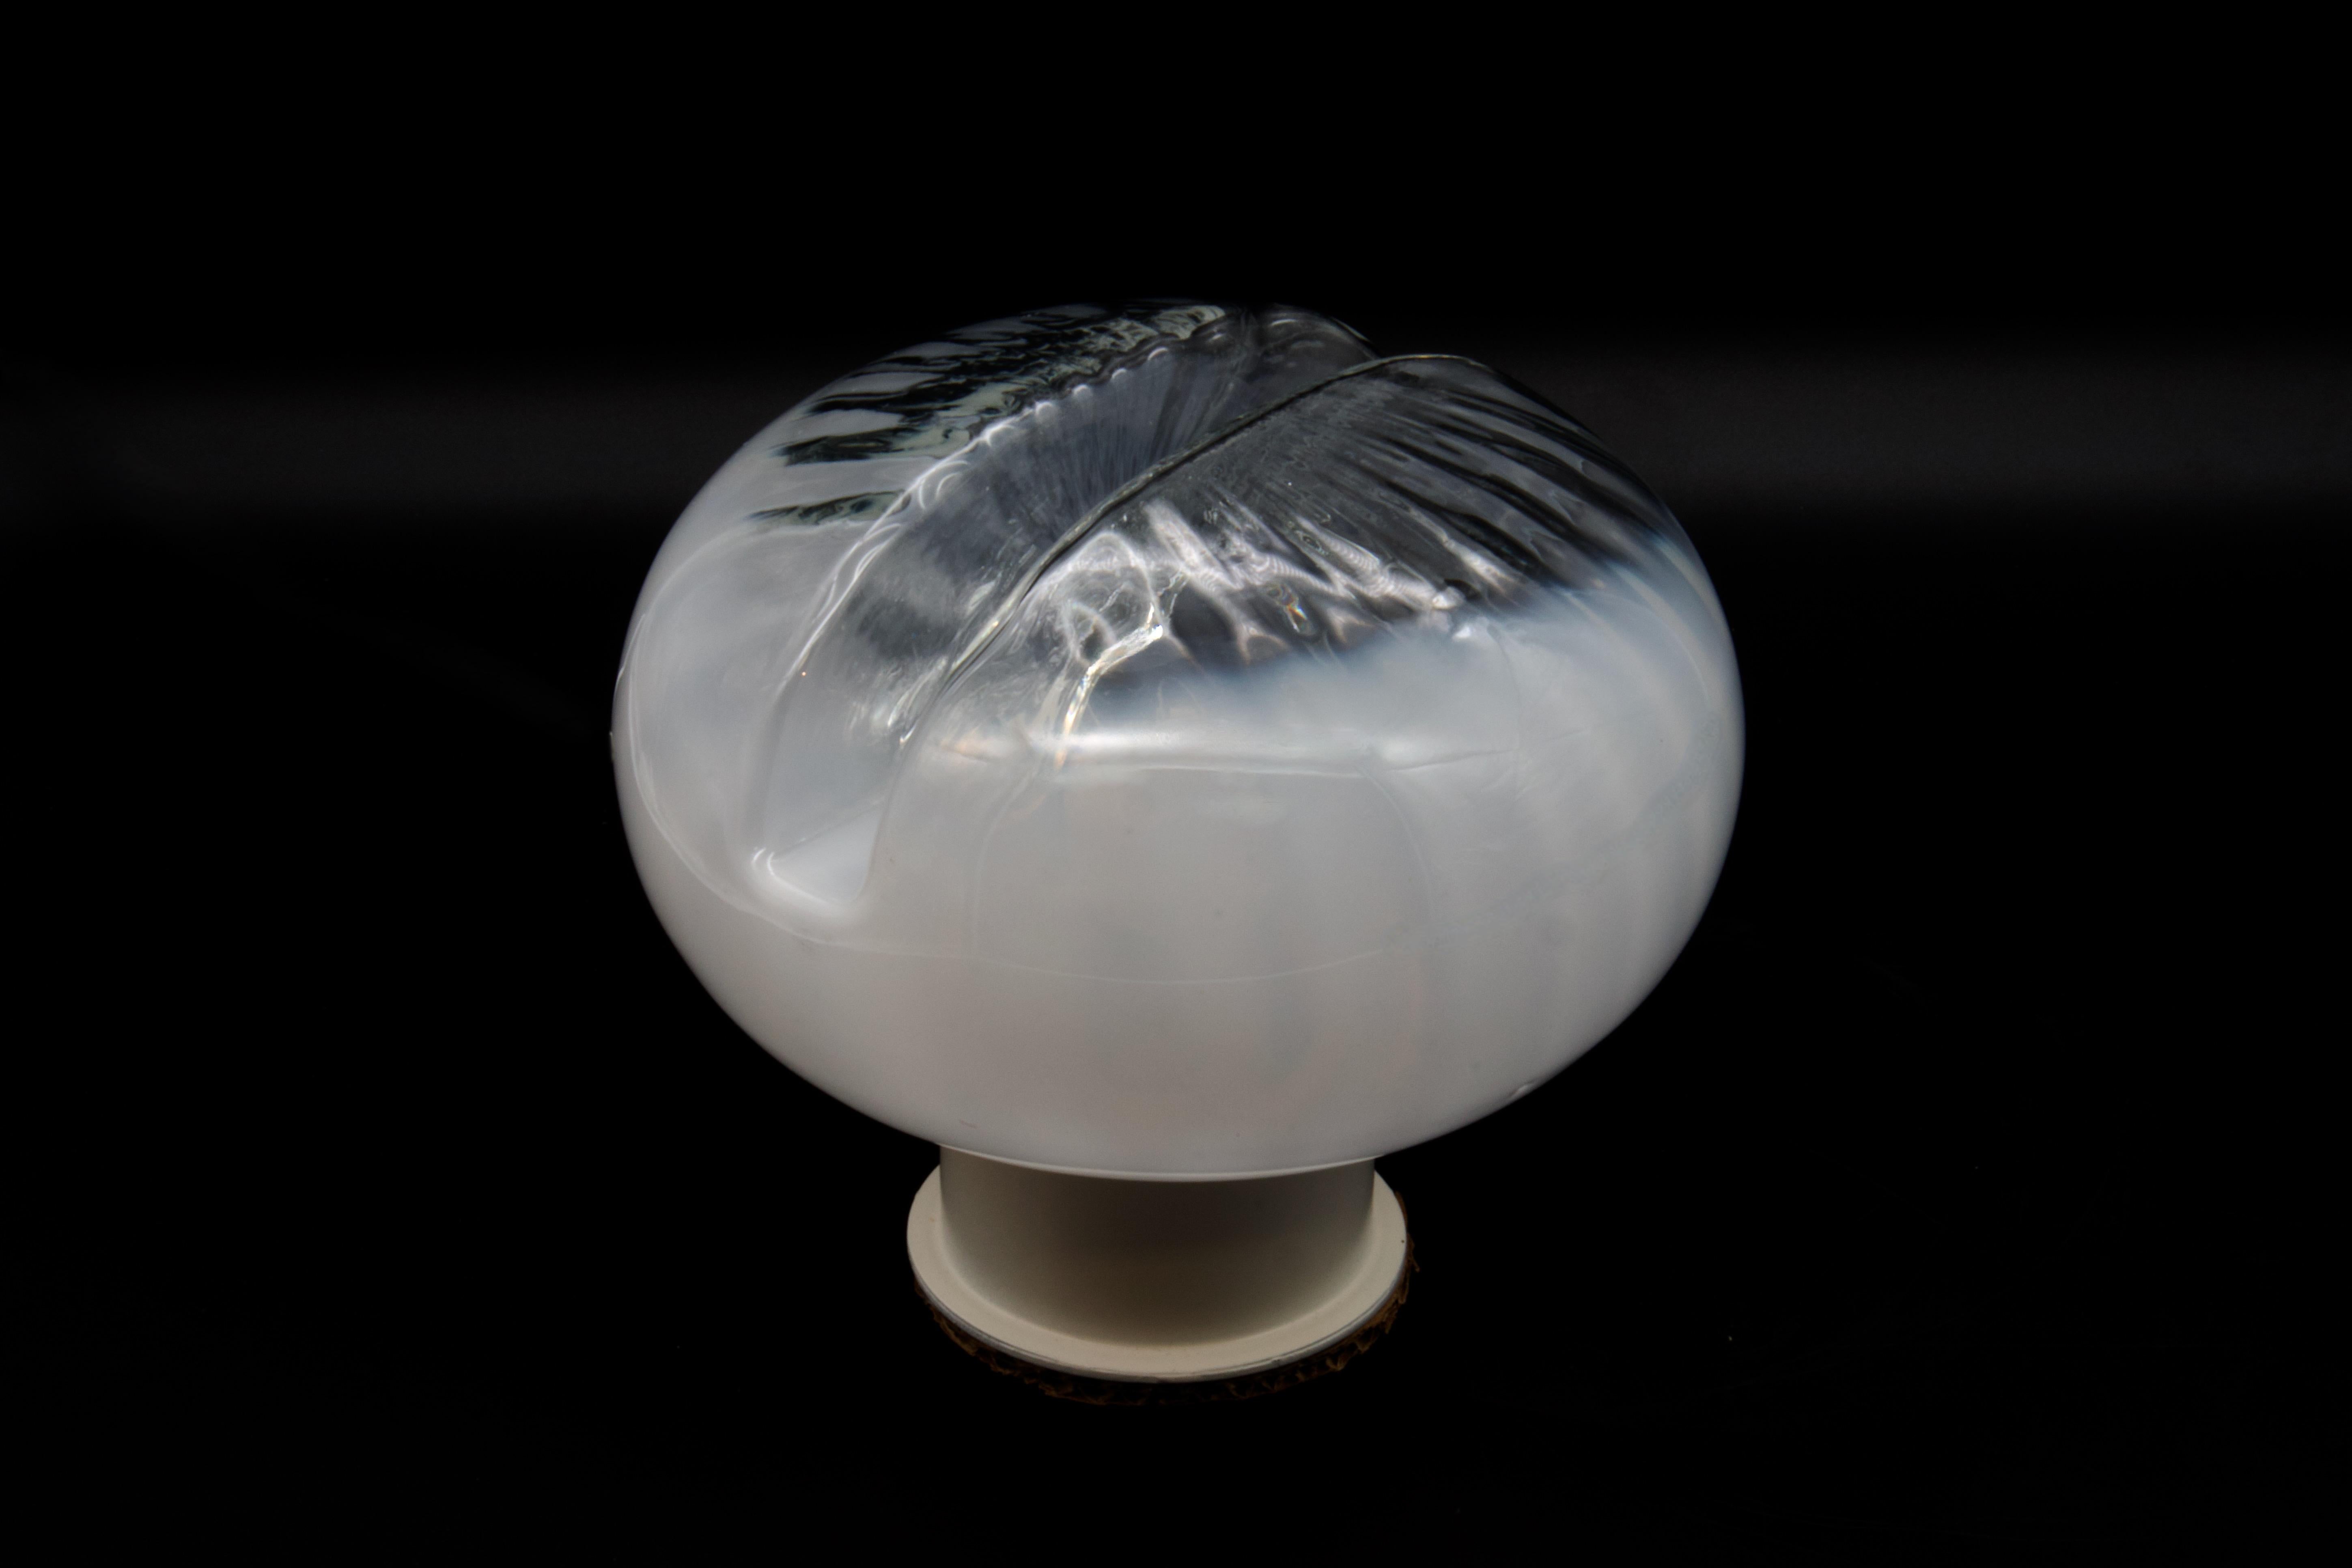 Hand-Crafted Mid Century Modern Murano Glass Mushroom Table Lamp, Mazzega Italy 1970s For Sale